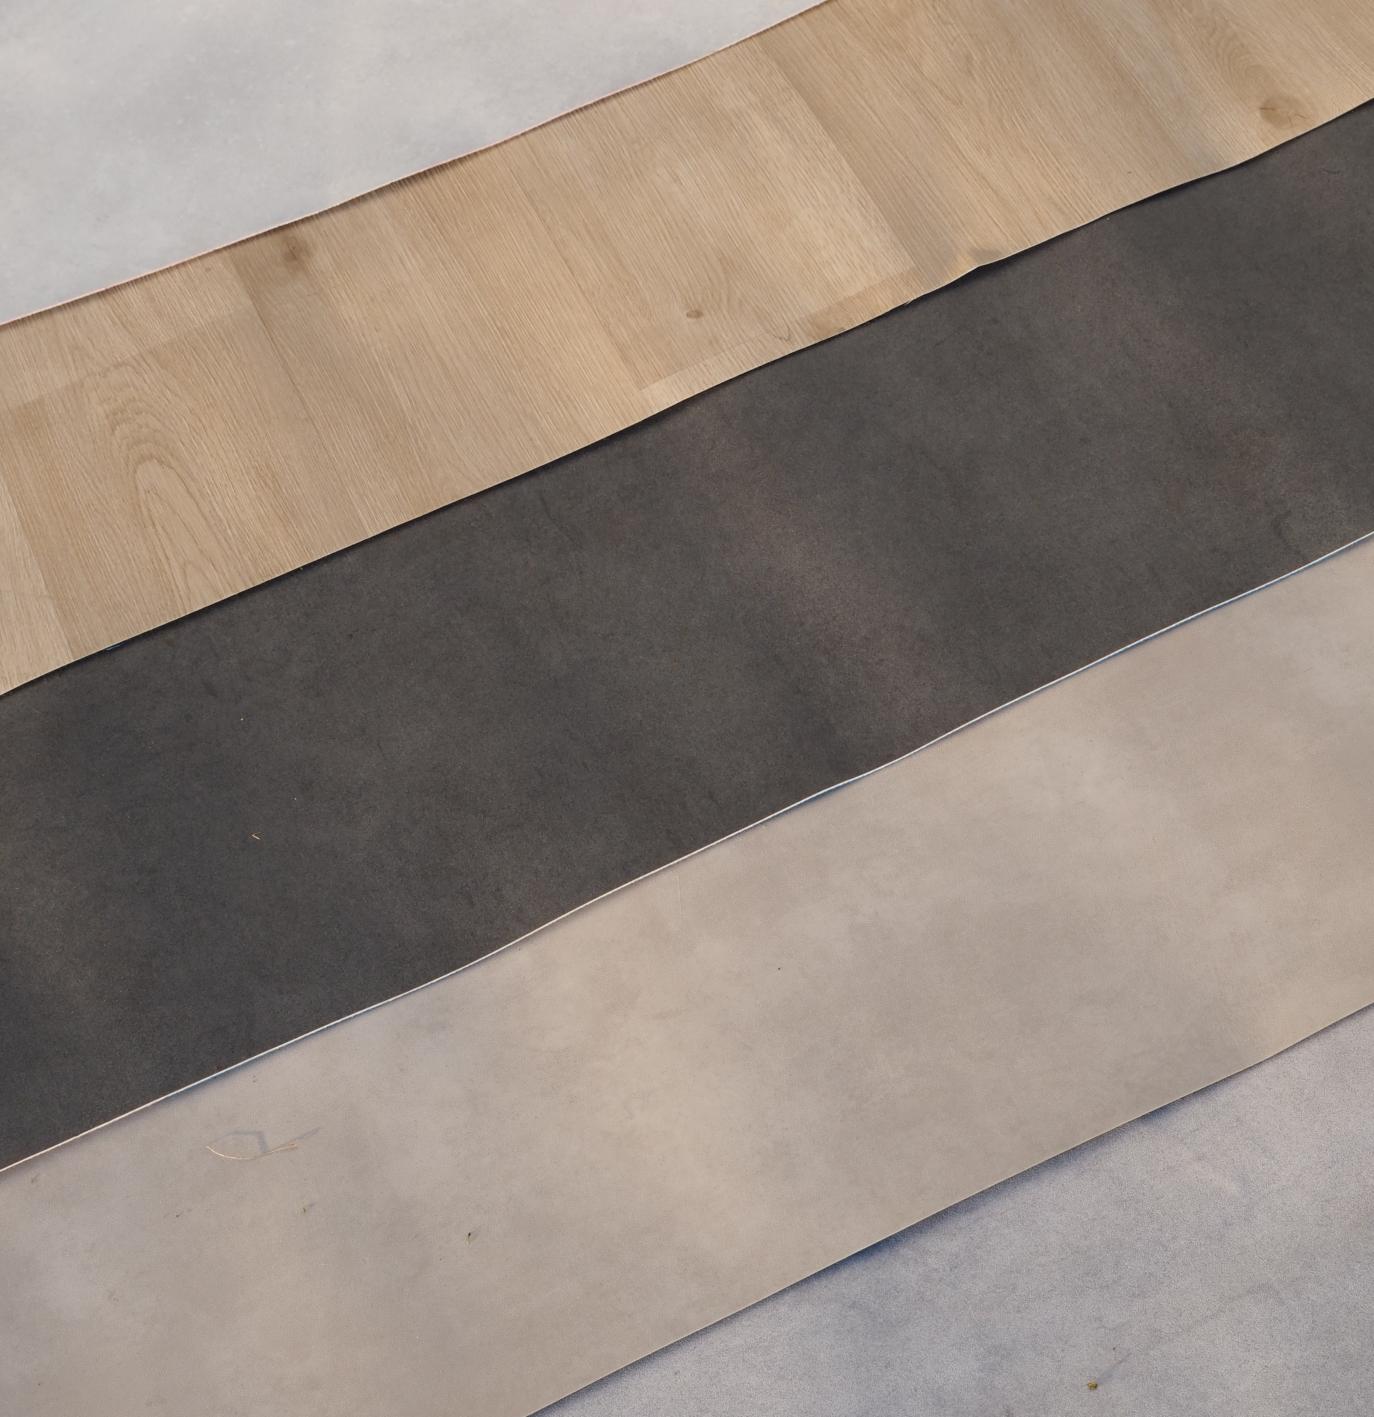 Vinyl flooring by Gerflor (from L. 200 to 300 cm)